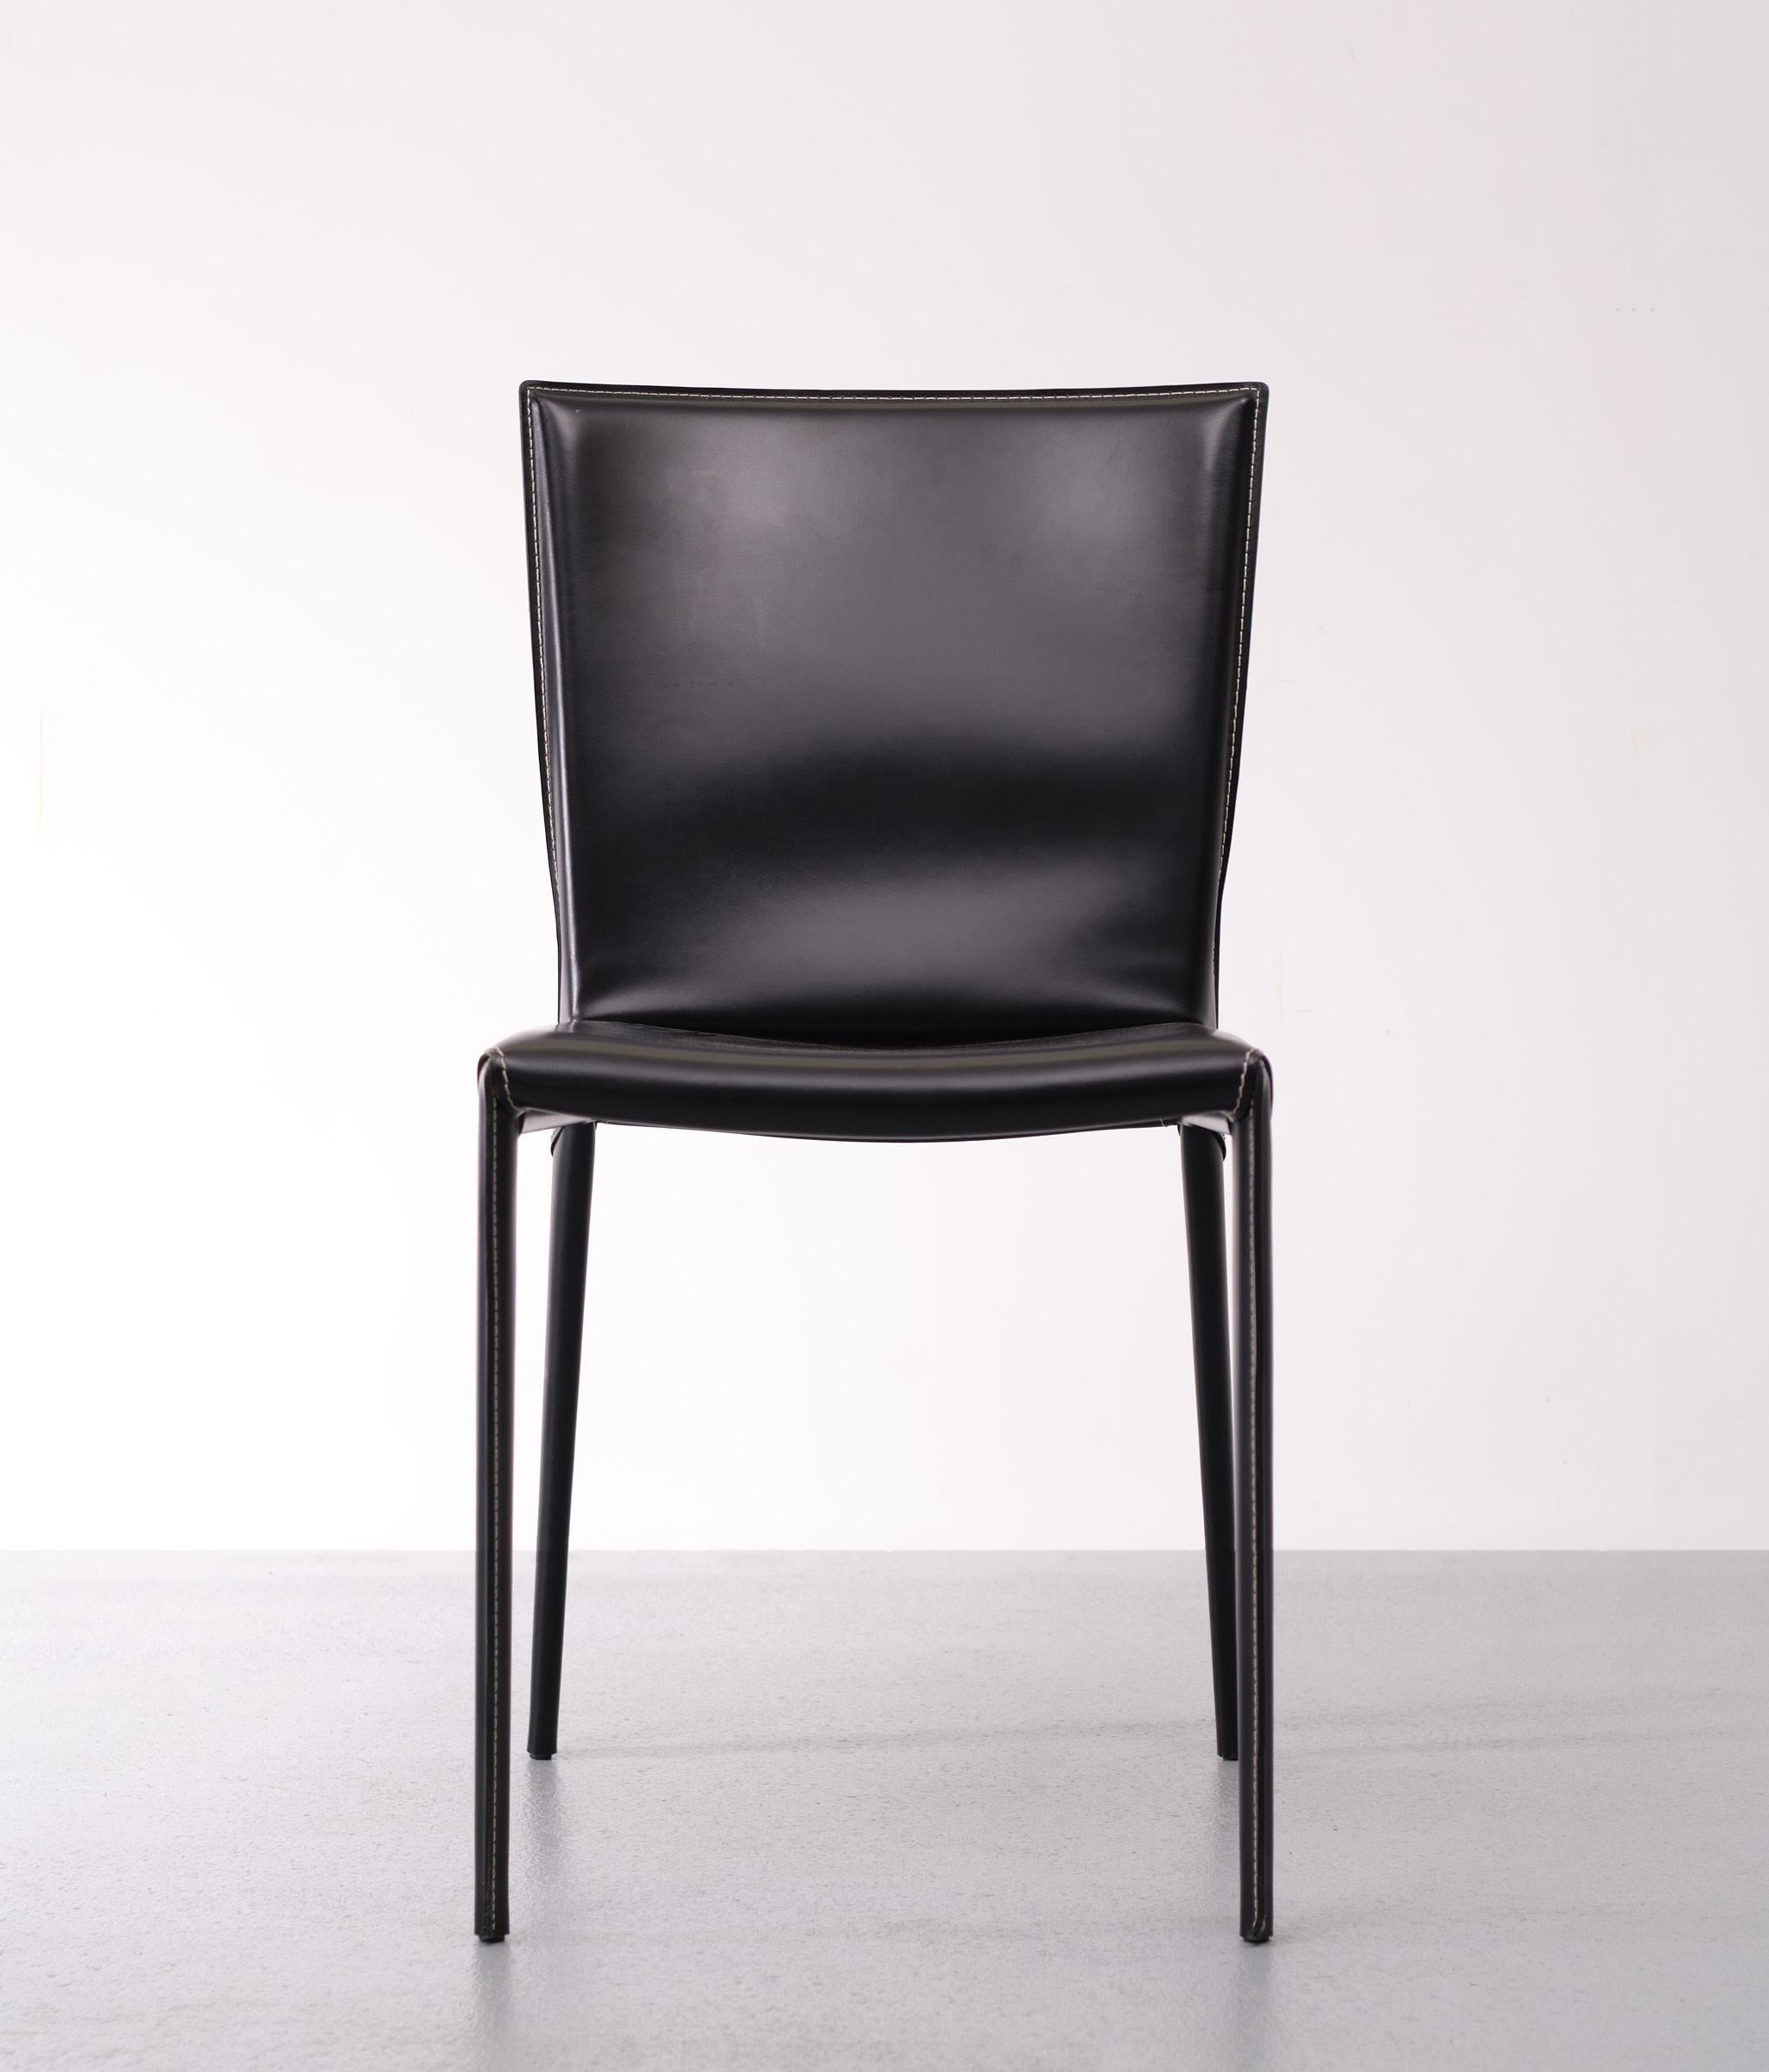 The modern chair Beverly stems from the creativity of Paolo Cattelan and combines an elegant and refined personality with the comfort that distinguishes a designer chair of excellent quality. This leather chair, designed to furnish any room in the